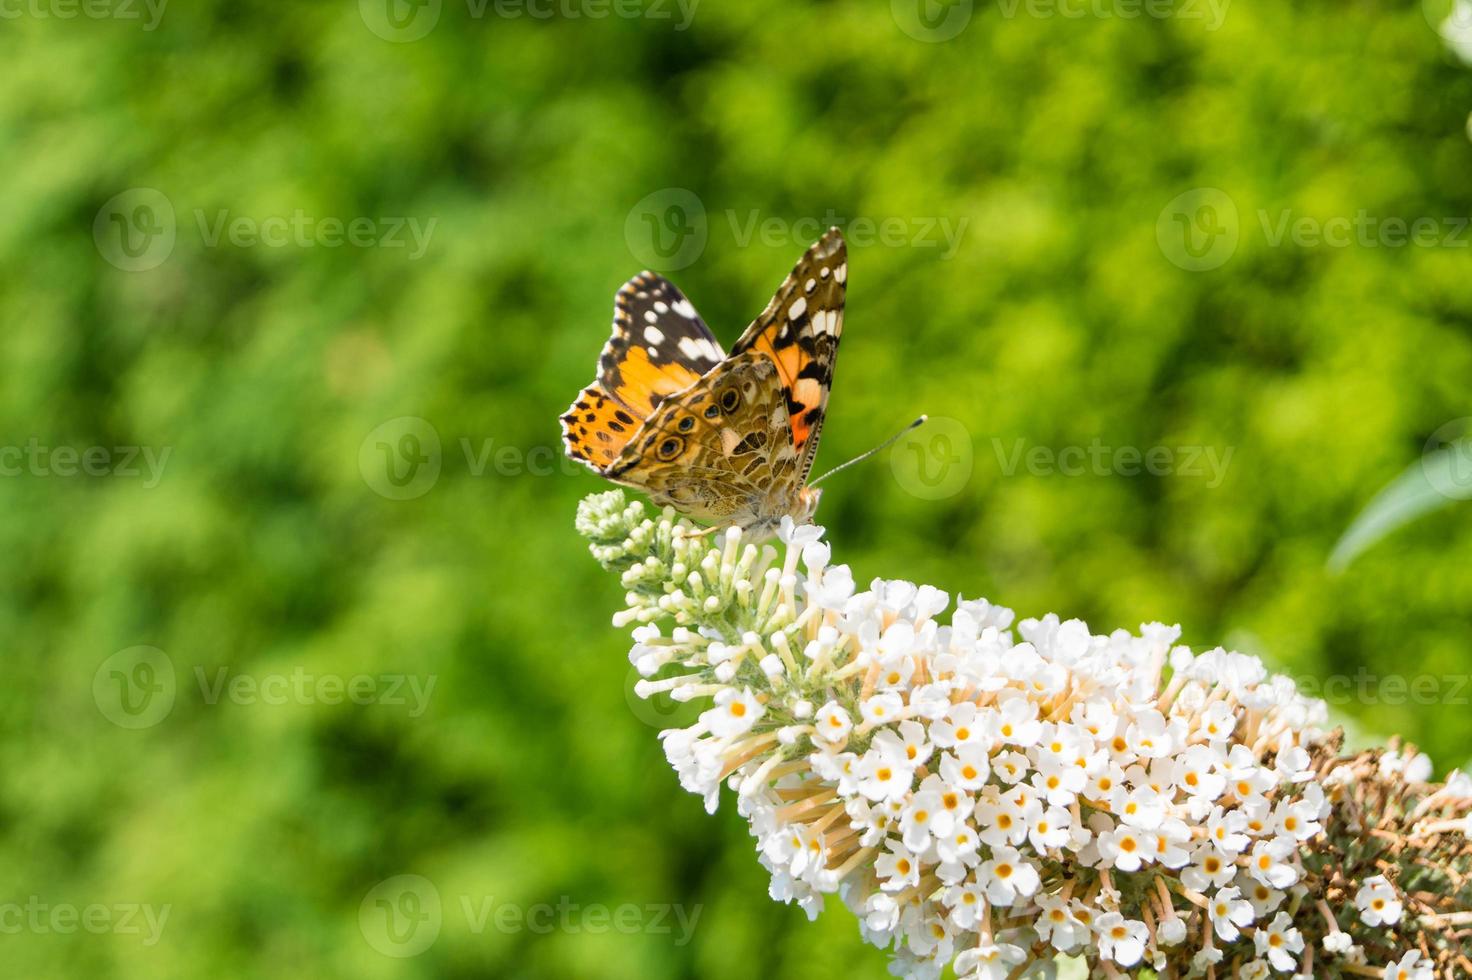 Butterfly Vanessa Cardui or Cynthia cardui in the garden photo